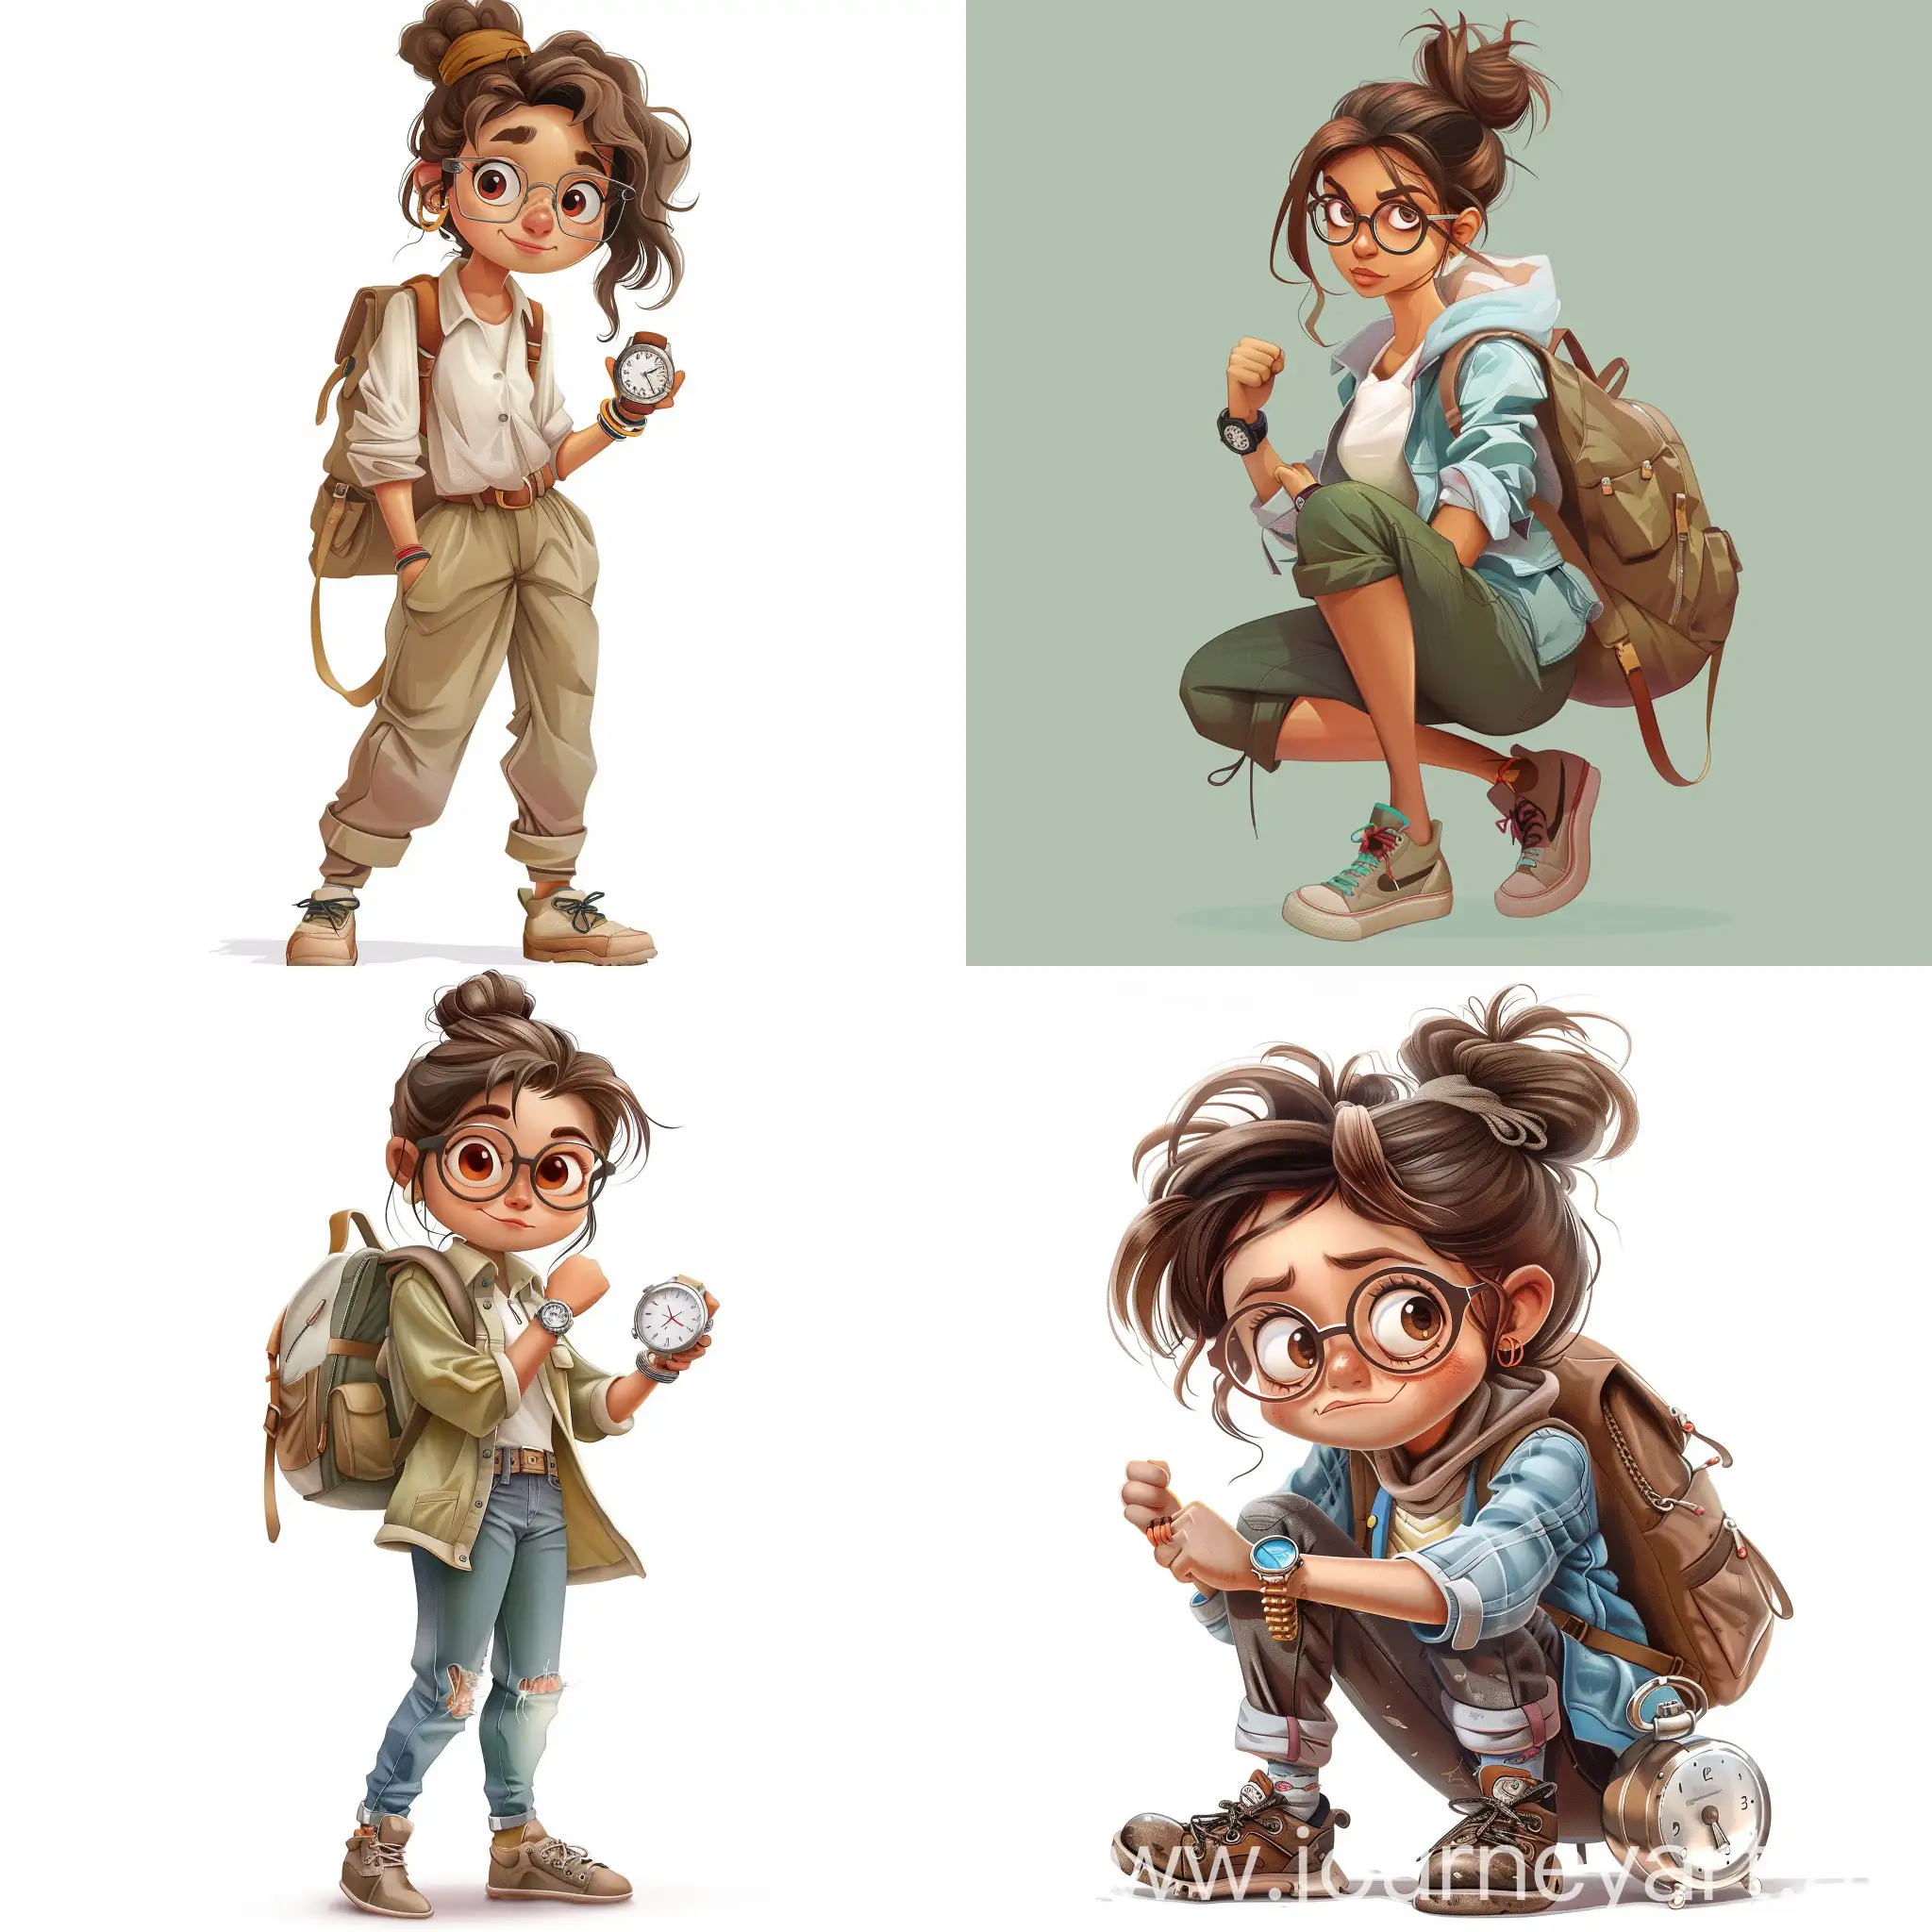 Background for this character description female, woman, brown eyes, specs, messy bun, brown hair, pride, modest and humble attire, watch in hand, backpack, decent clothes, shoes, struggling, Indian.